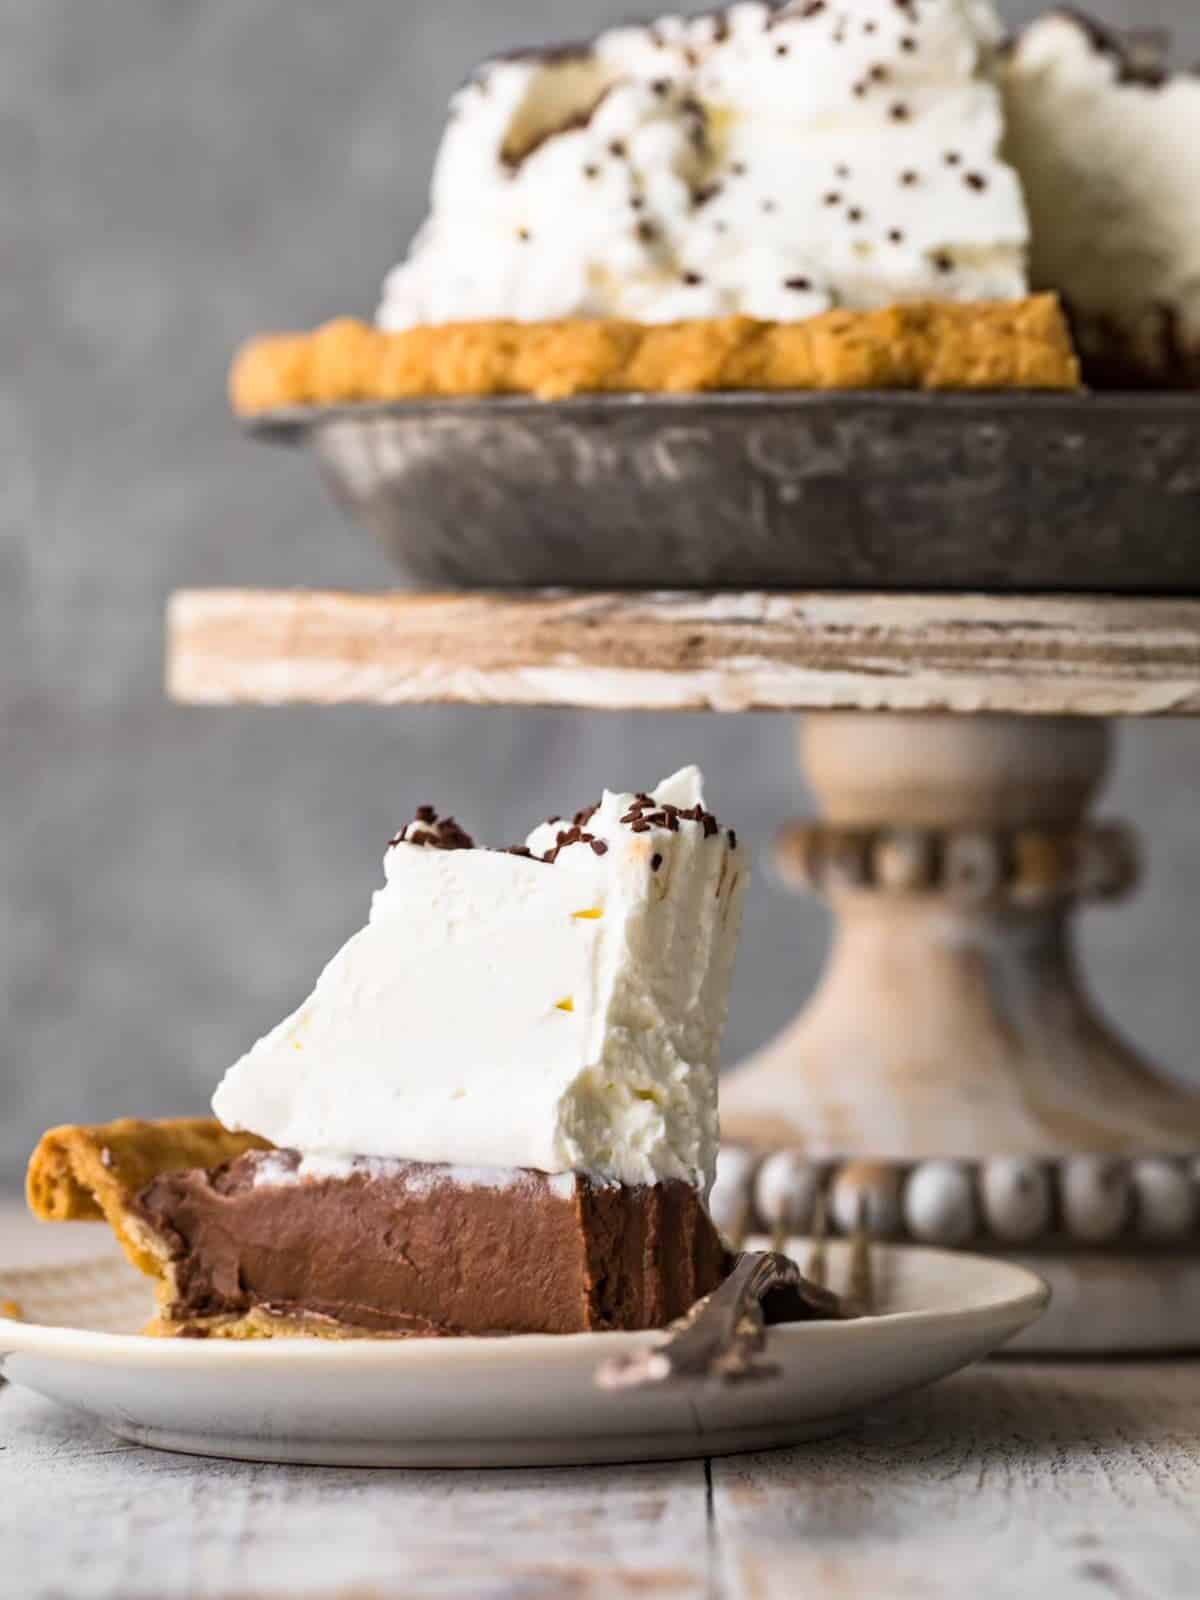 A delectable slice of the best chocolate cream pie garnished with whipped cream on a plate.